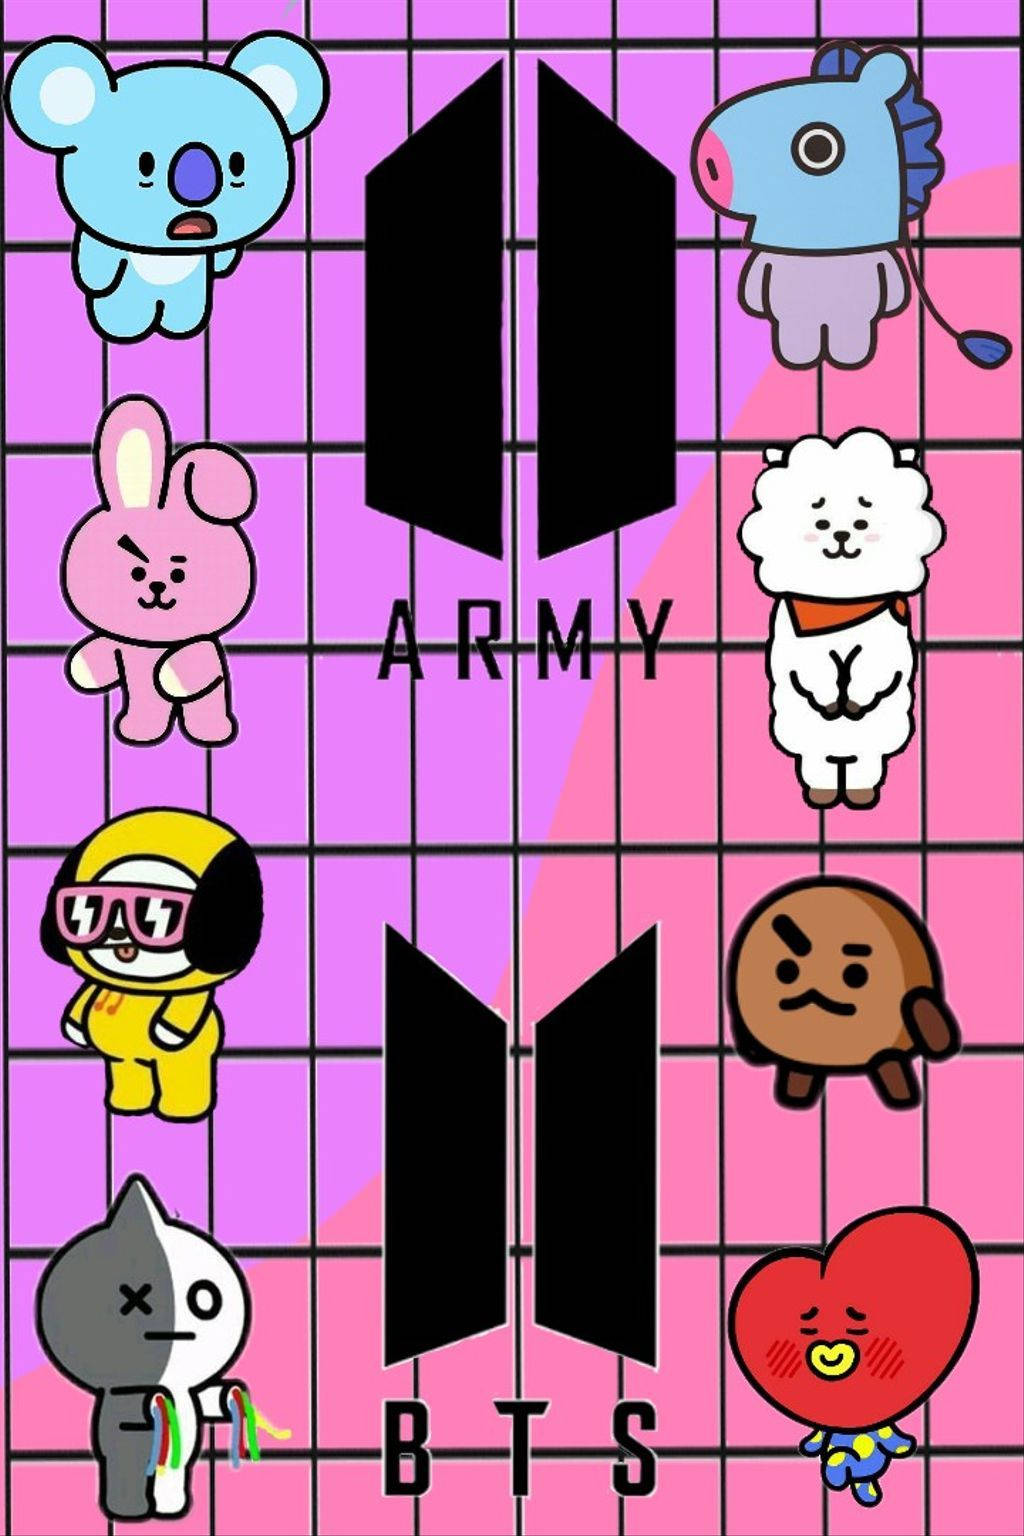 Download Cute BT21 Wallpapers Free for Android - Cute BT21 Wallpapers APK  Download - STEPrimo.com